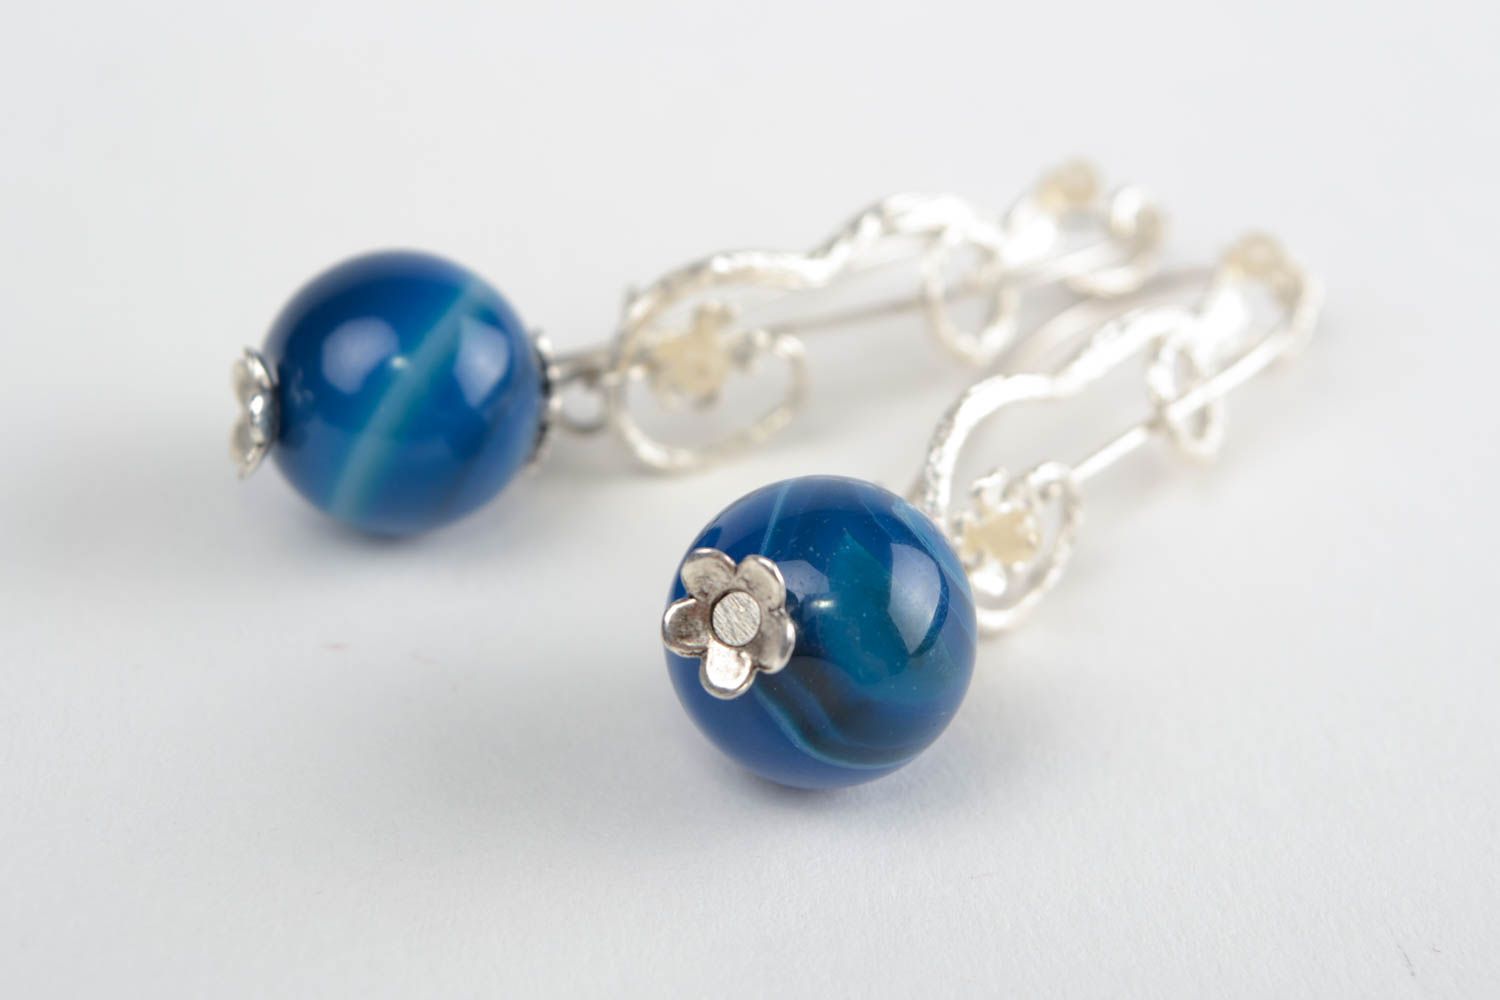 Handmade dangling earrings with silver colored fittings and blue agate beads photo 4